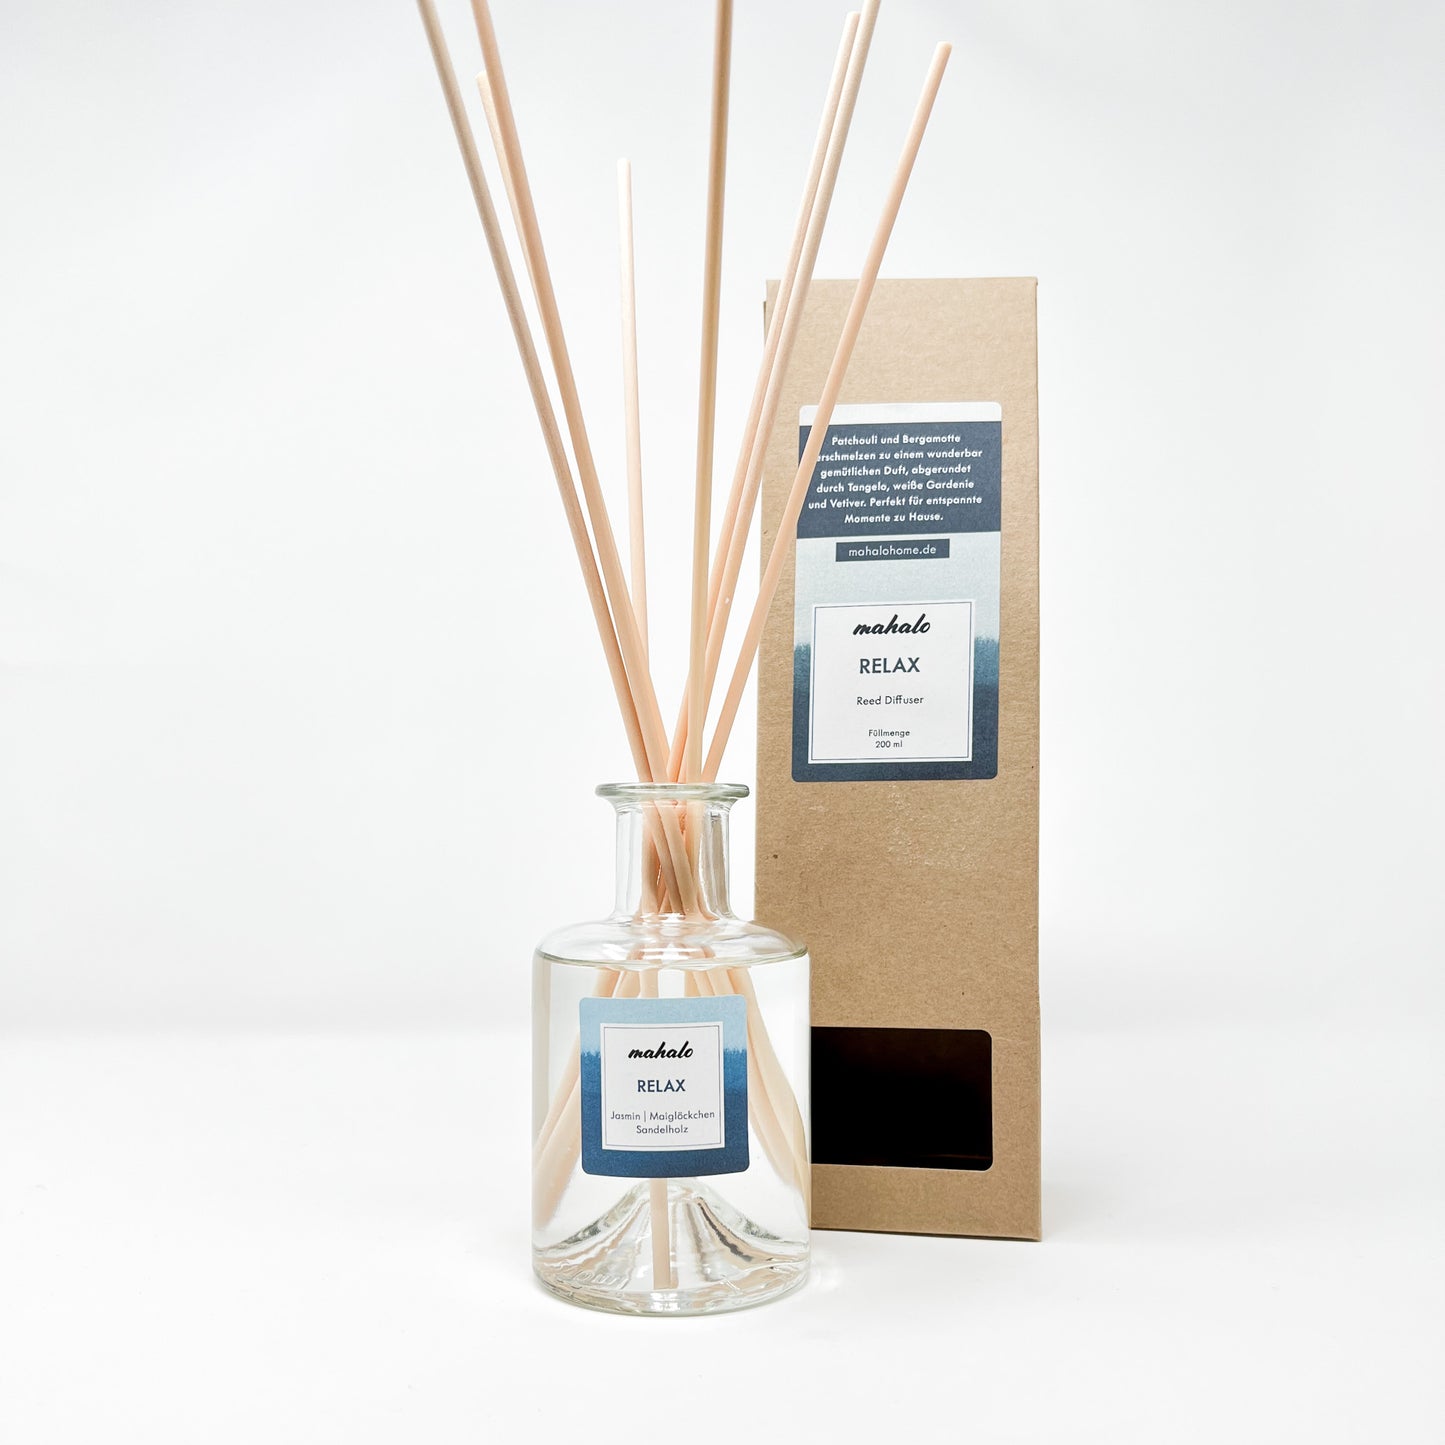 RELAX REED DIFFUSER